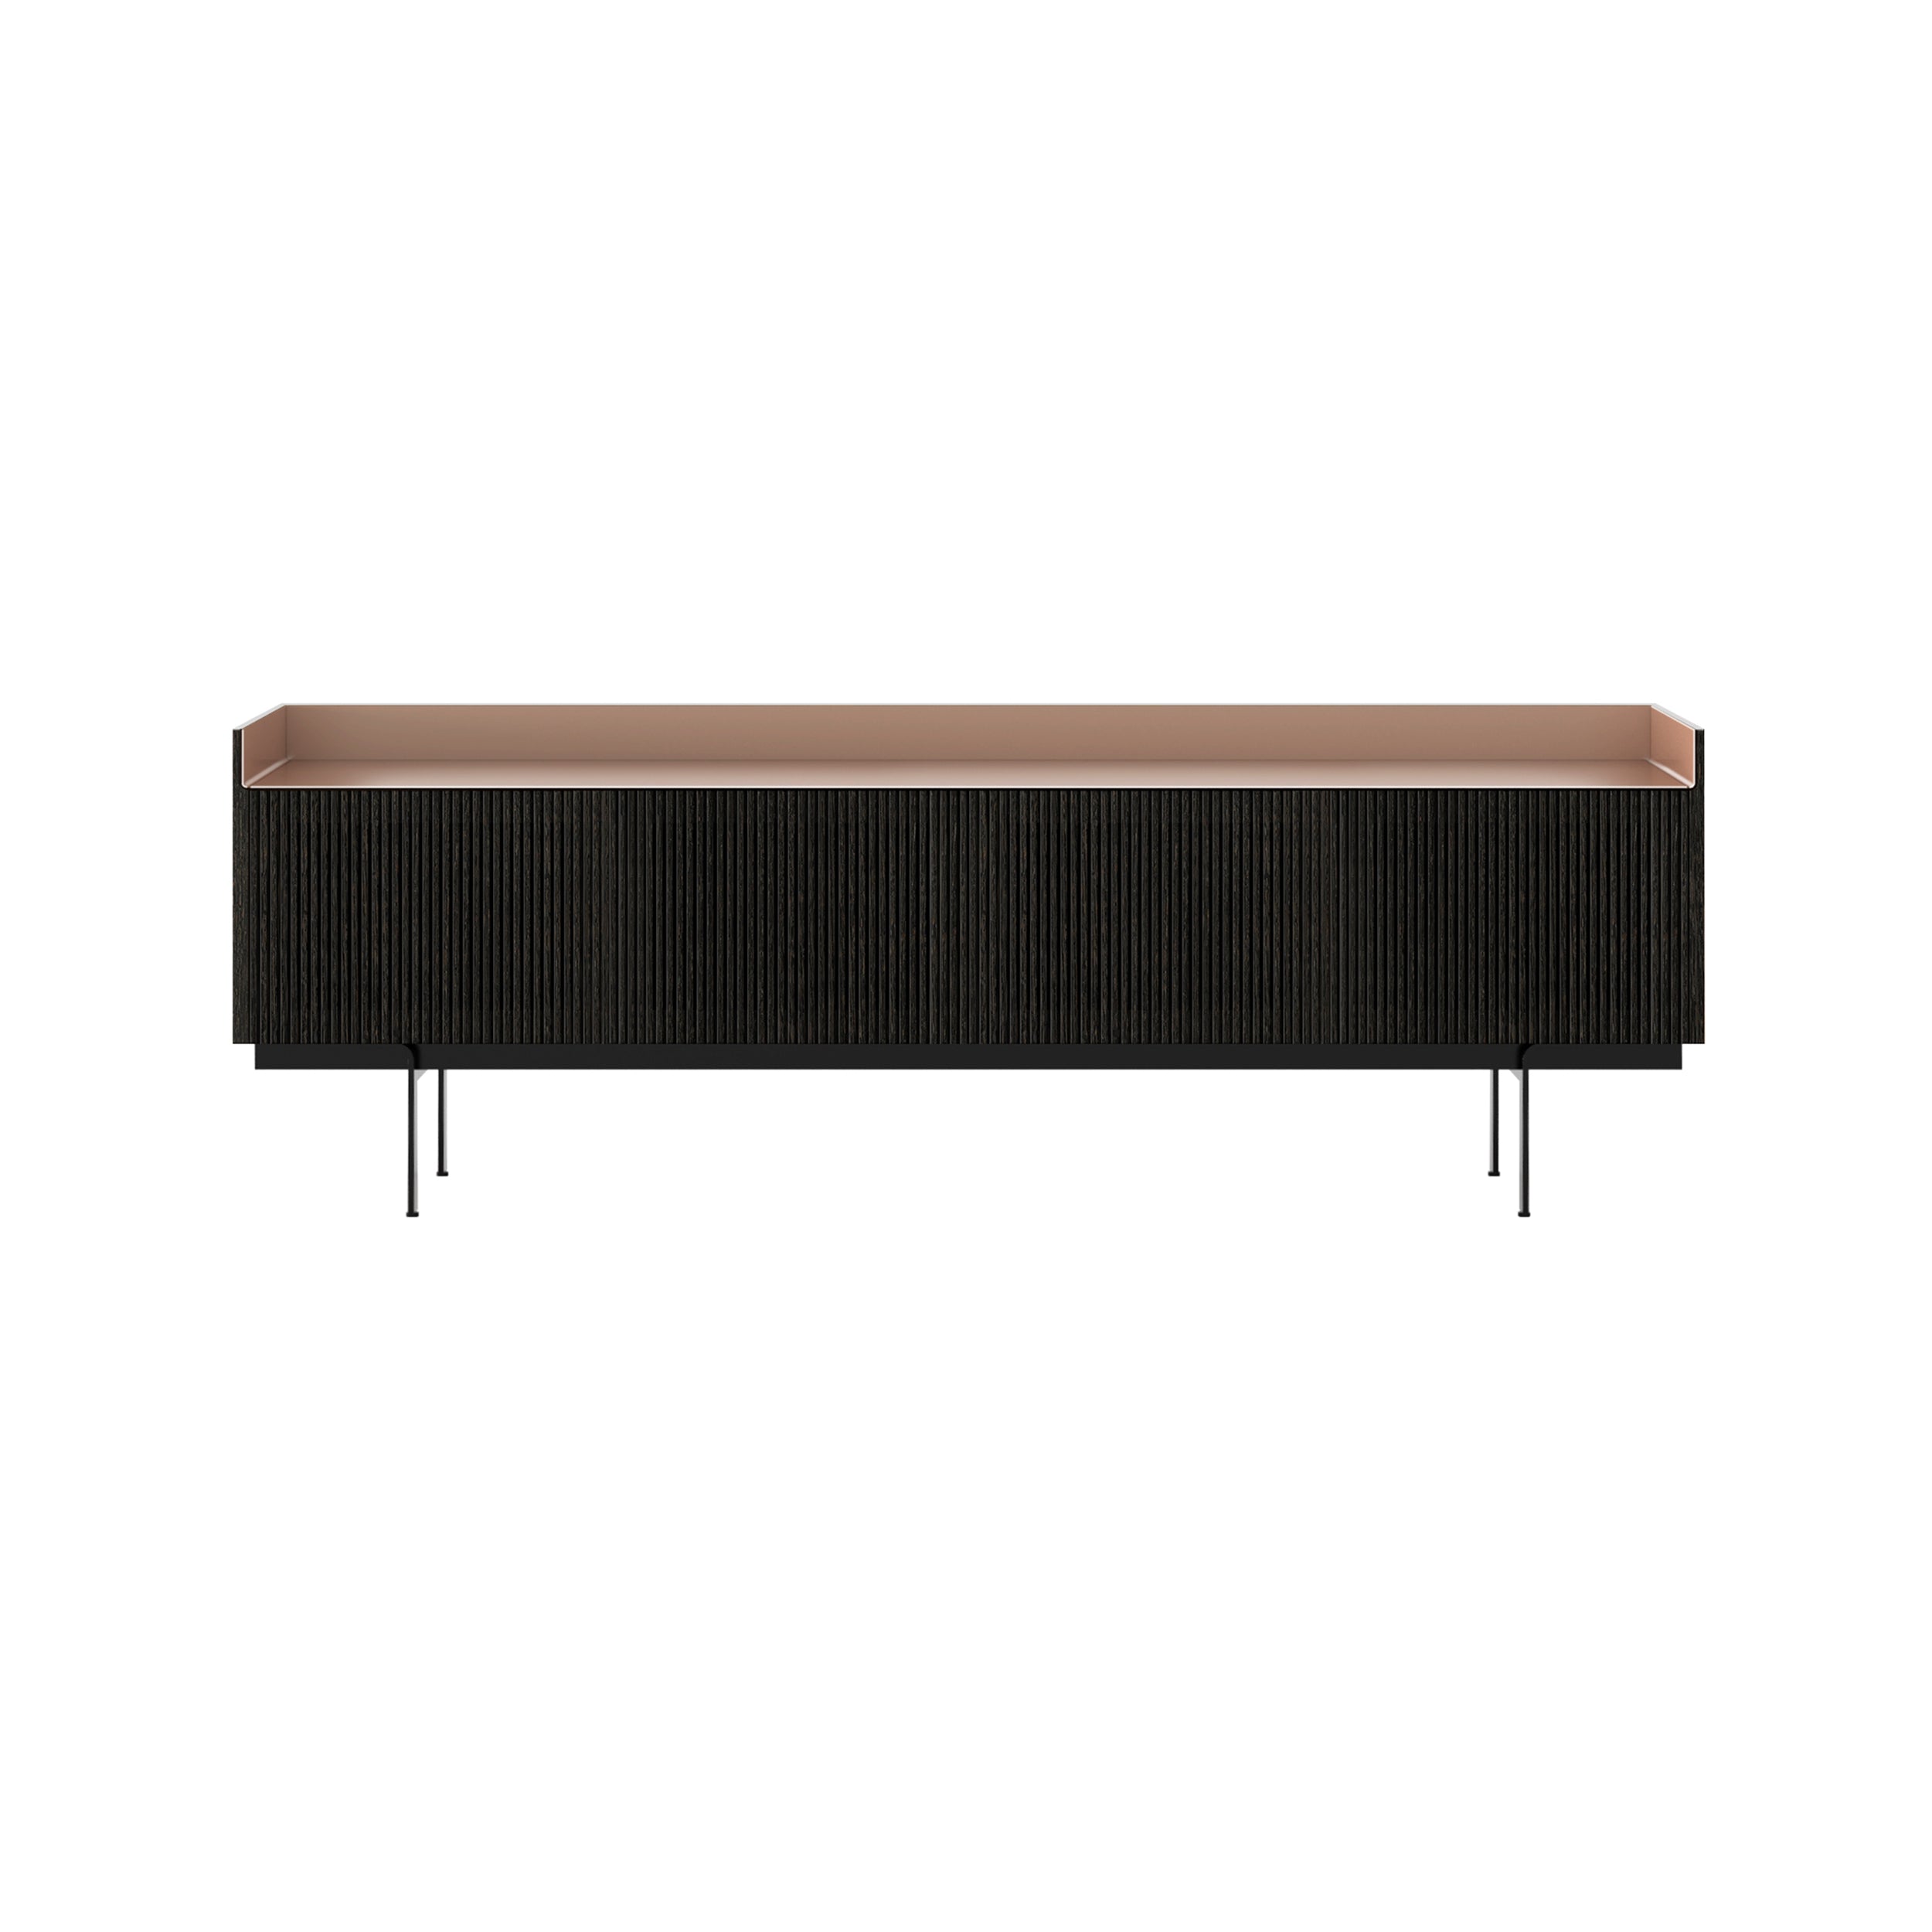 Stockholm Technic Sideboard: STH404 + Dark Grey Stained Oak + Anodized Aluminum Pale Rose + Black